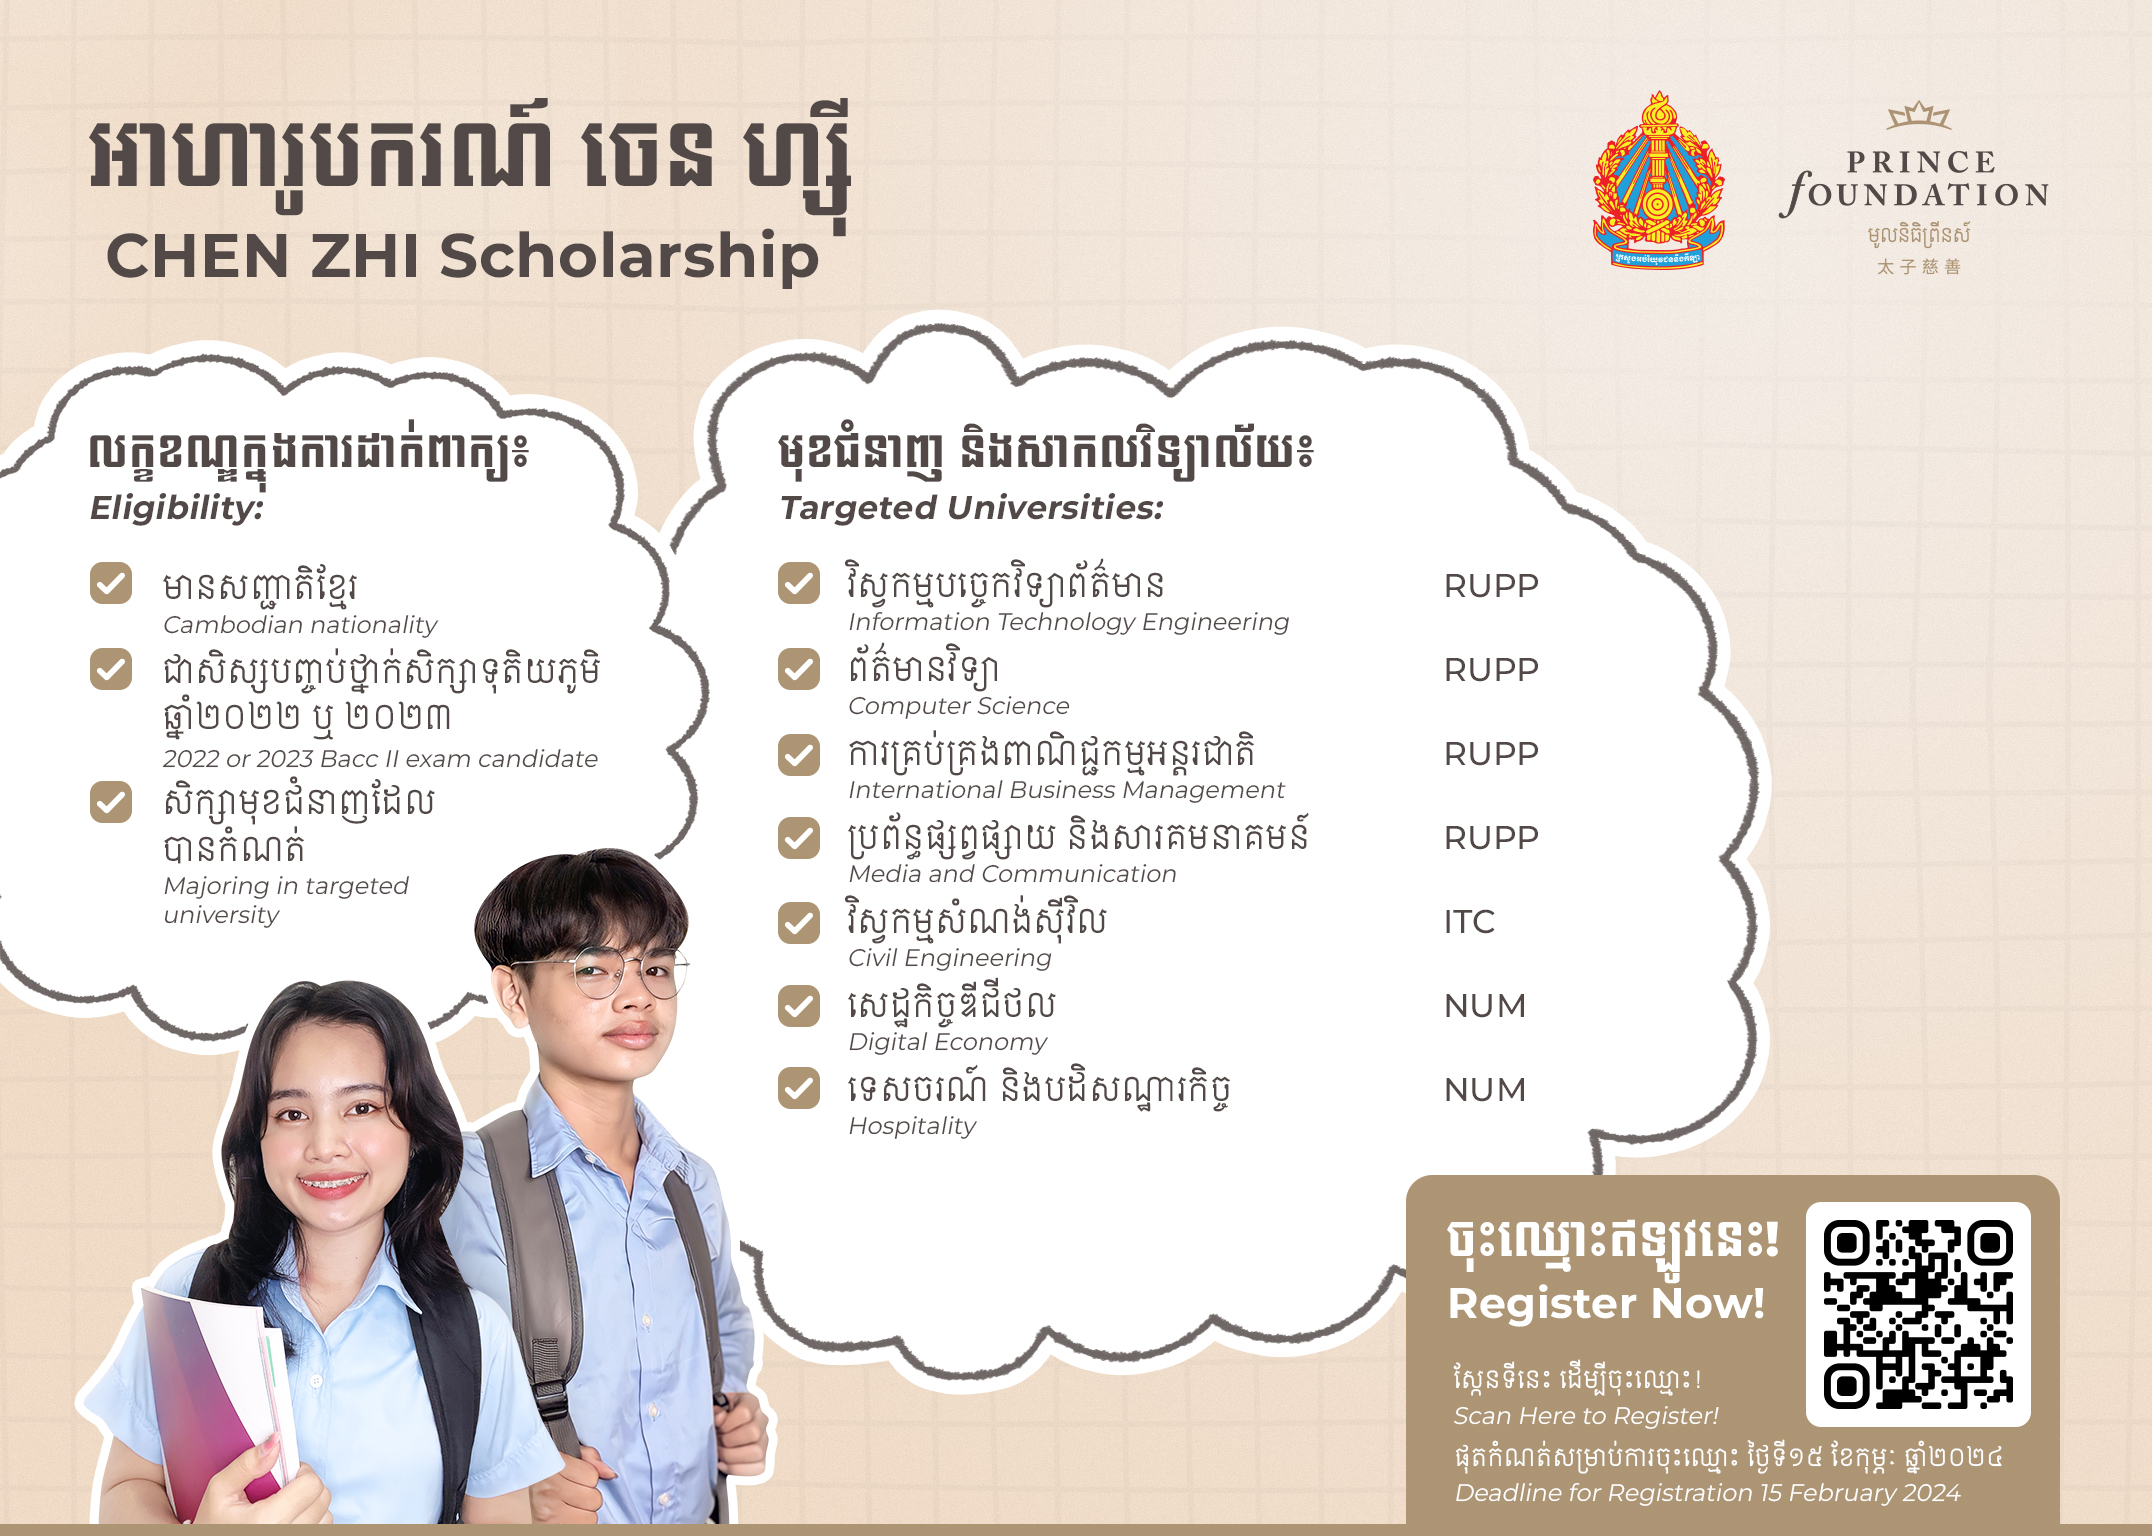 Under the leadership of Neak Oknha Chen Zhi, Chairman of Prince Holding Group, and in partnership with the Ministry of Education, Youth and Sport (MoEYS), the Chen Zhi Scholarship is designed to identify and nurture talented and deserving individuals.